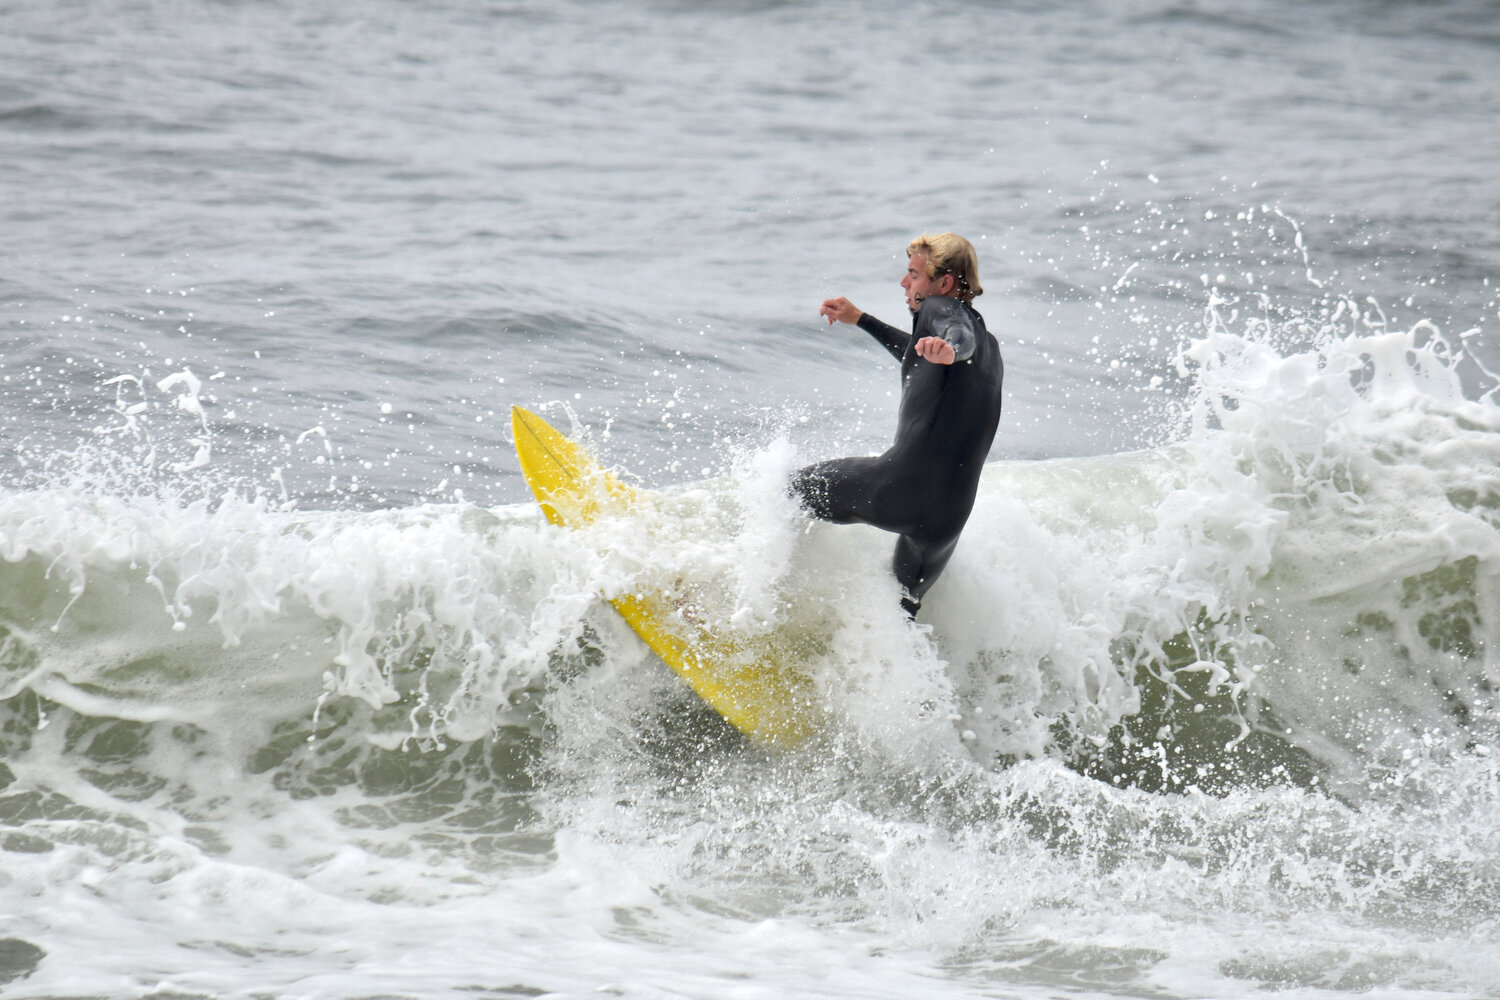 Surfers at Nobadeer Beach enjoyed large waves Monday, with heavy swells reported across the south shore.